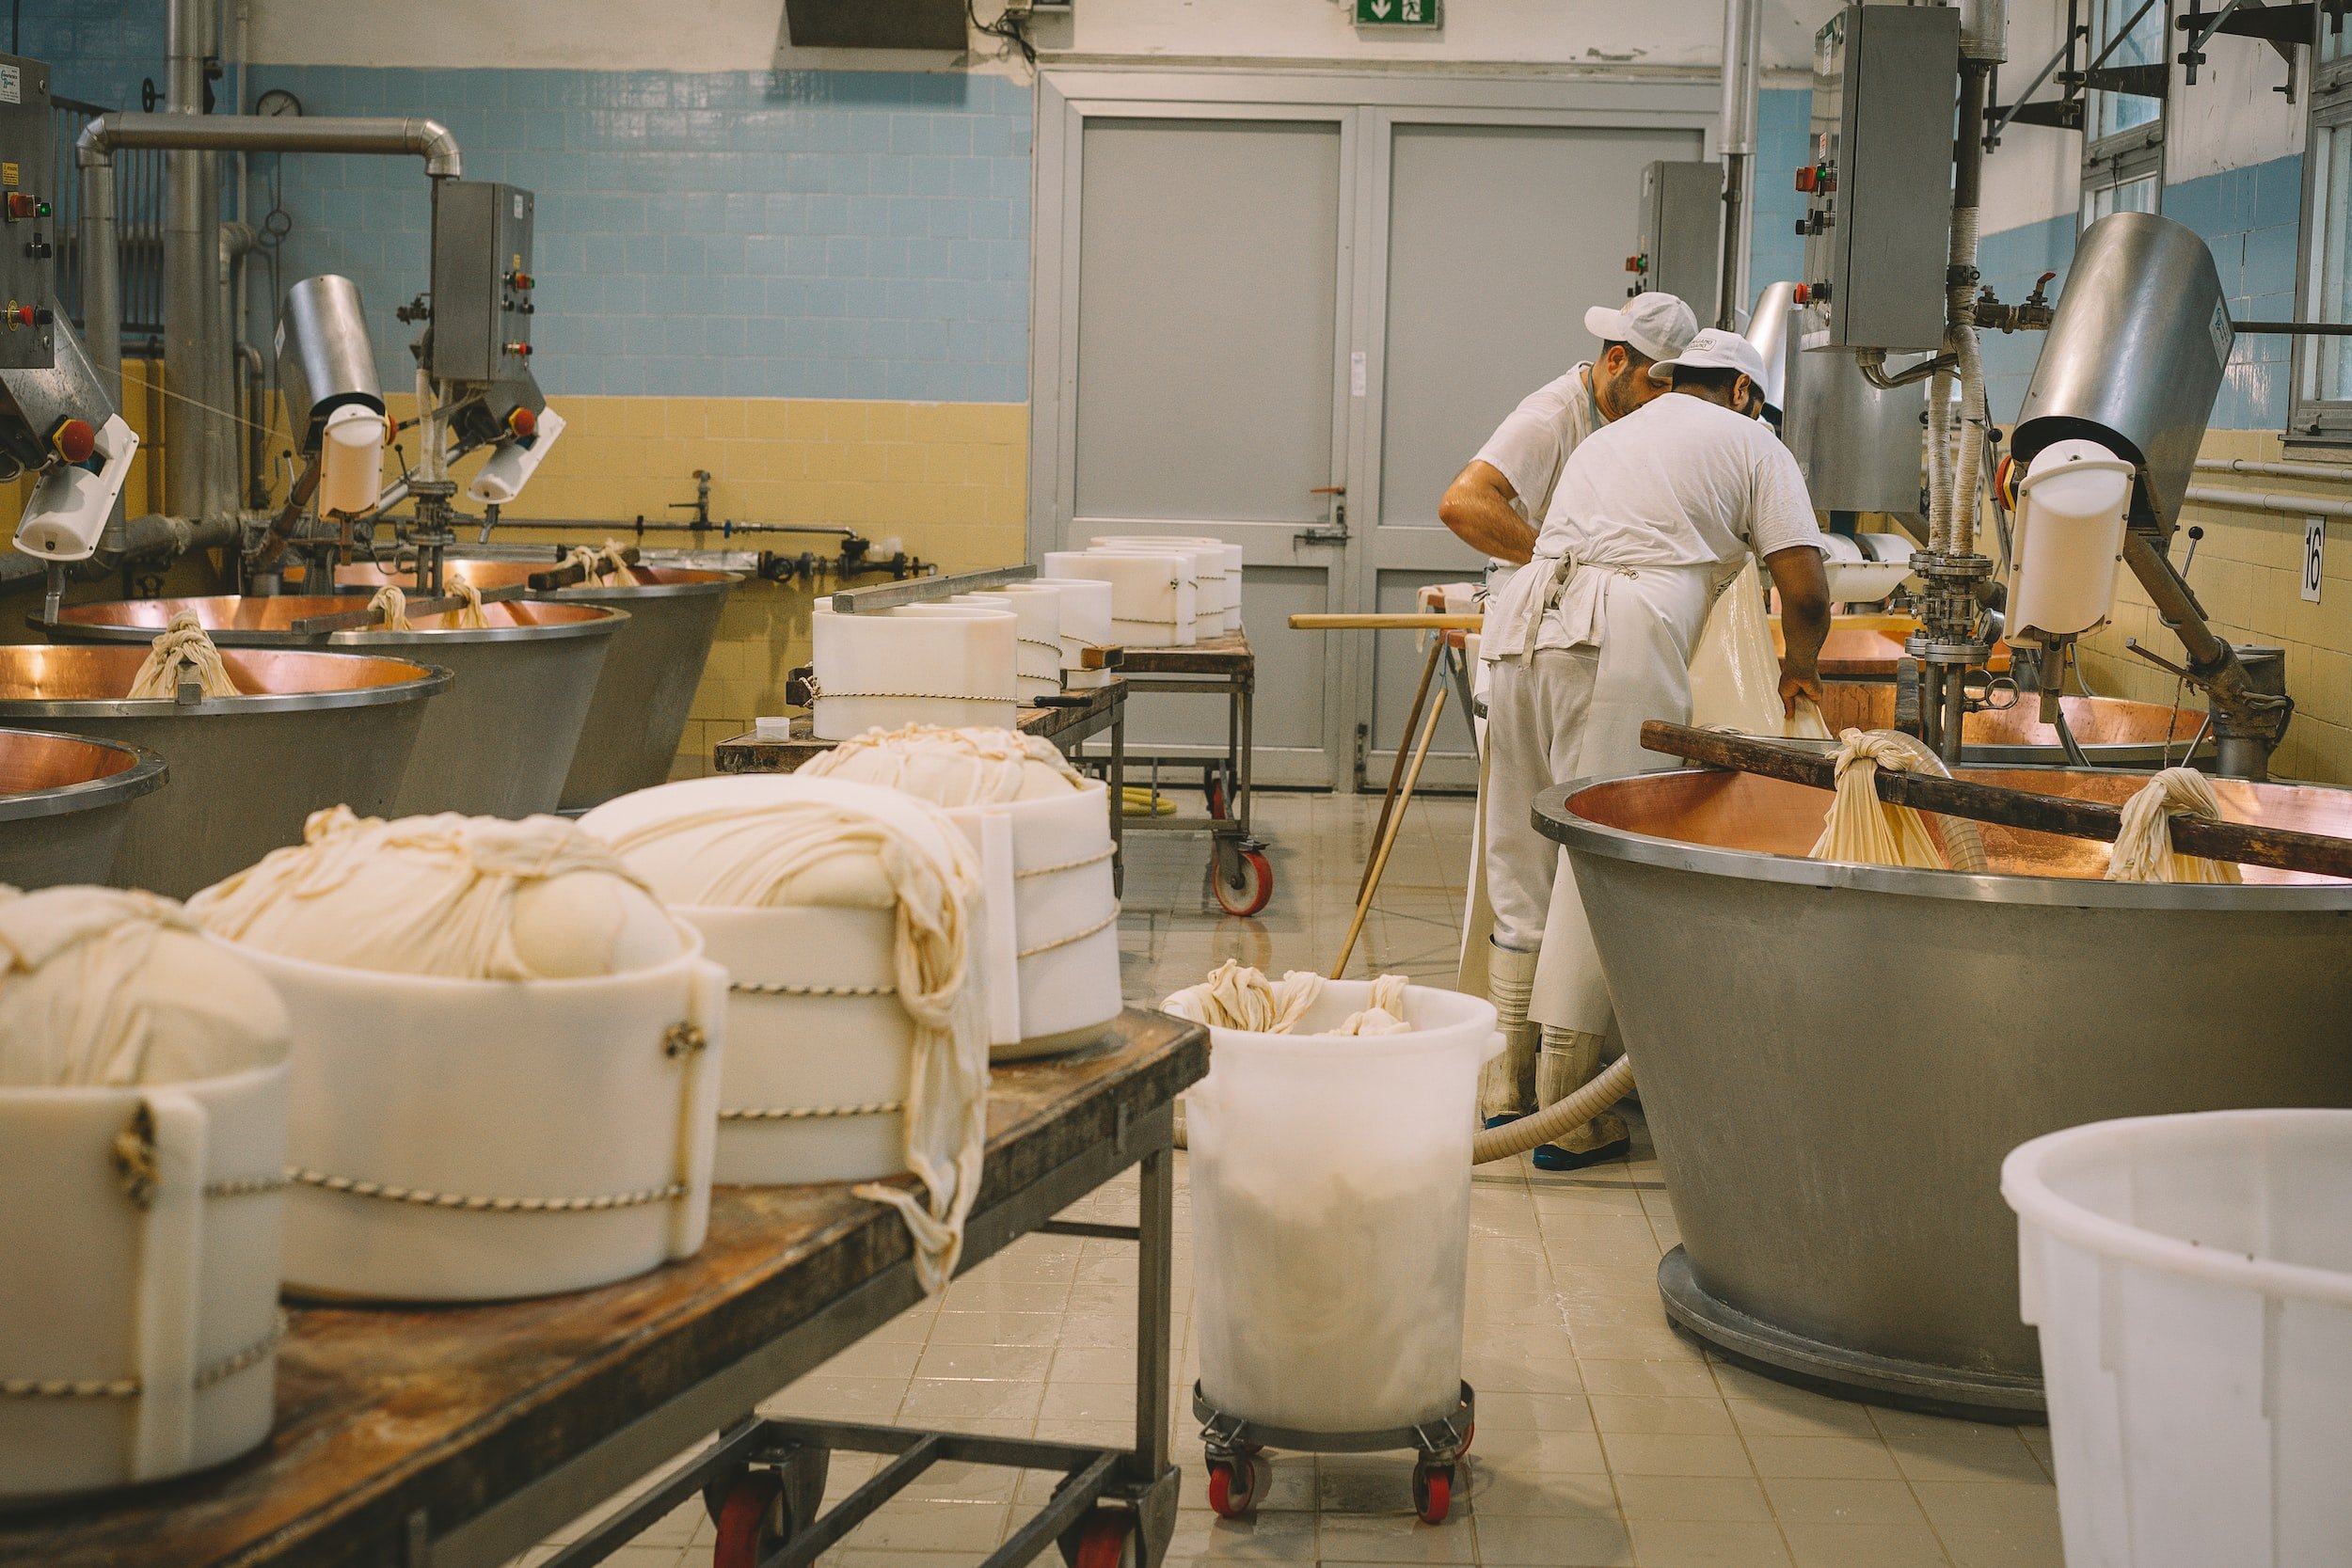 The interior of a cheese factory with many silver machines and two people in white making cheese